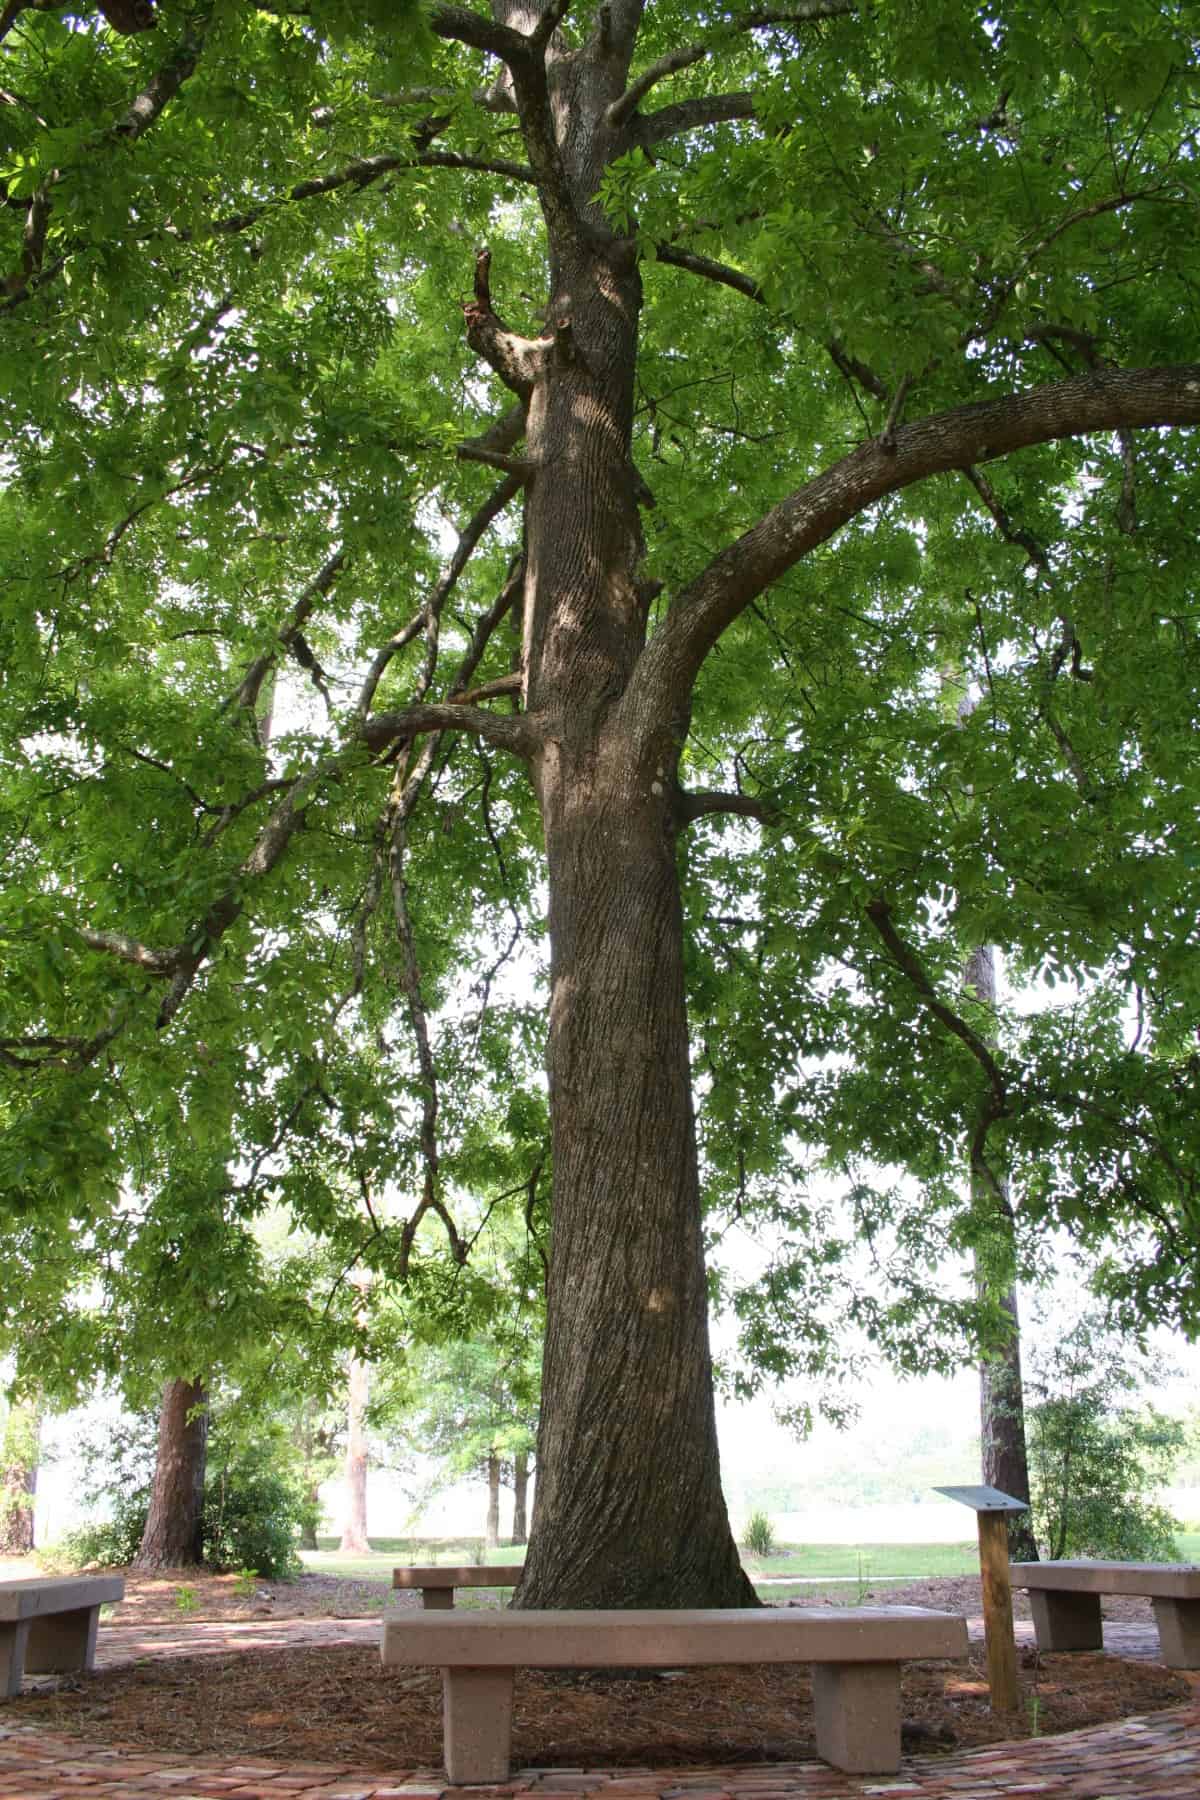 A vertical image of a shellbark hickory tree.